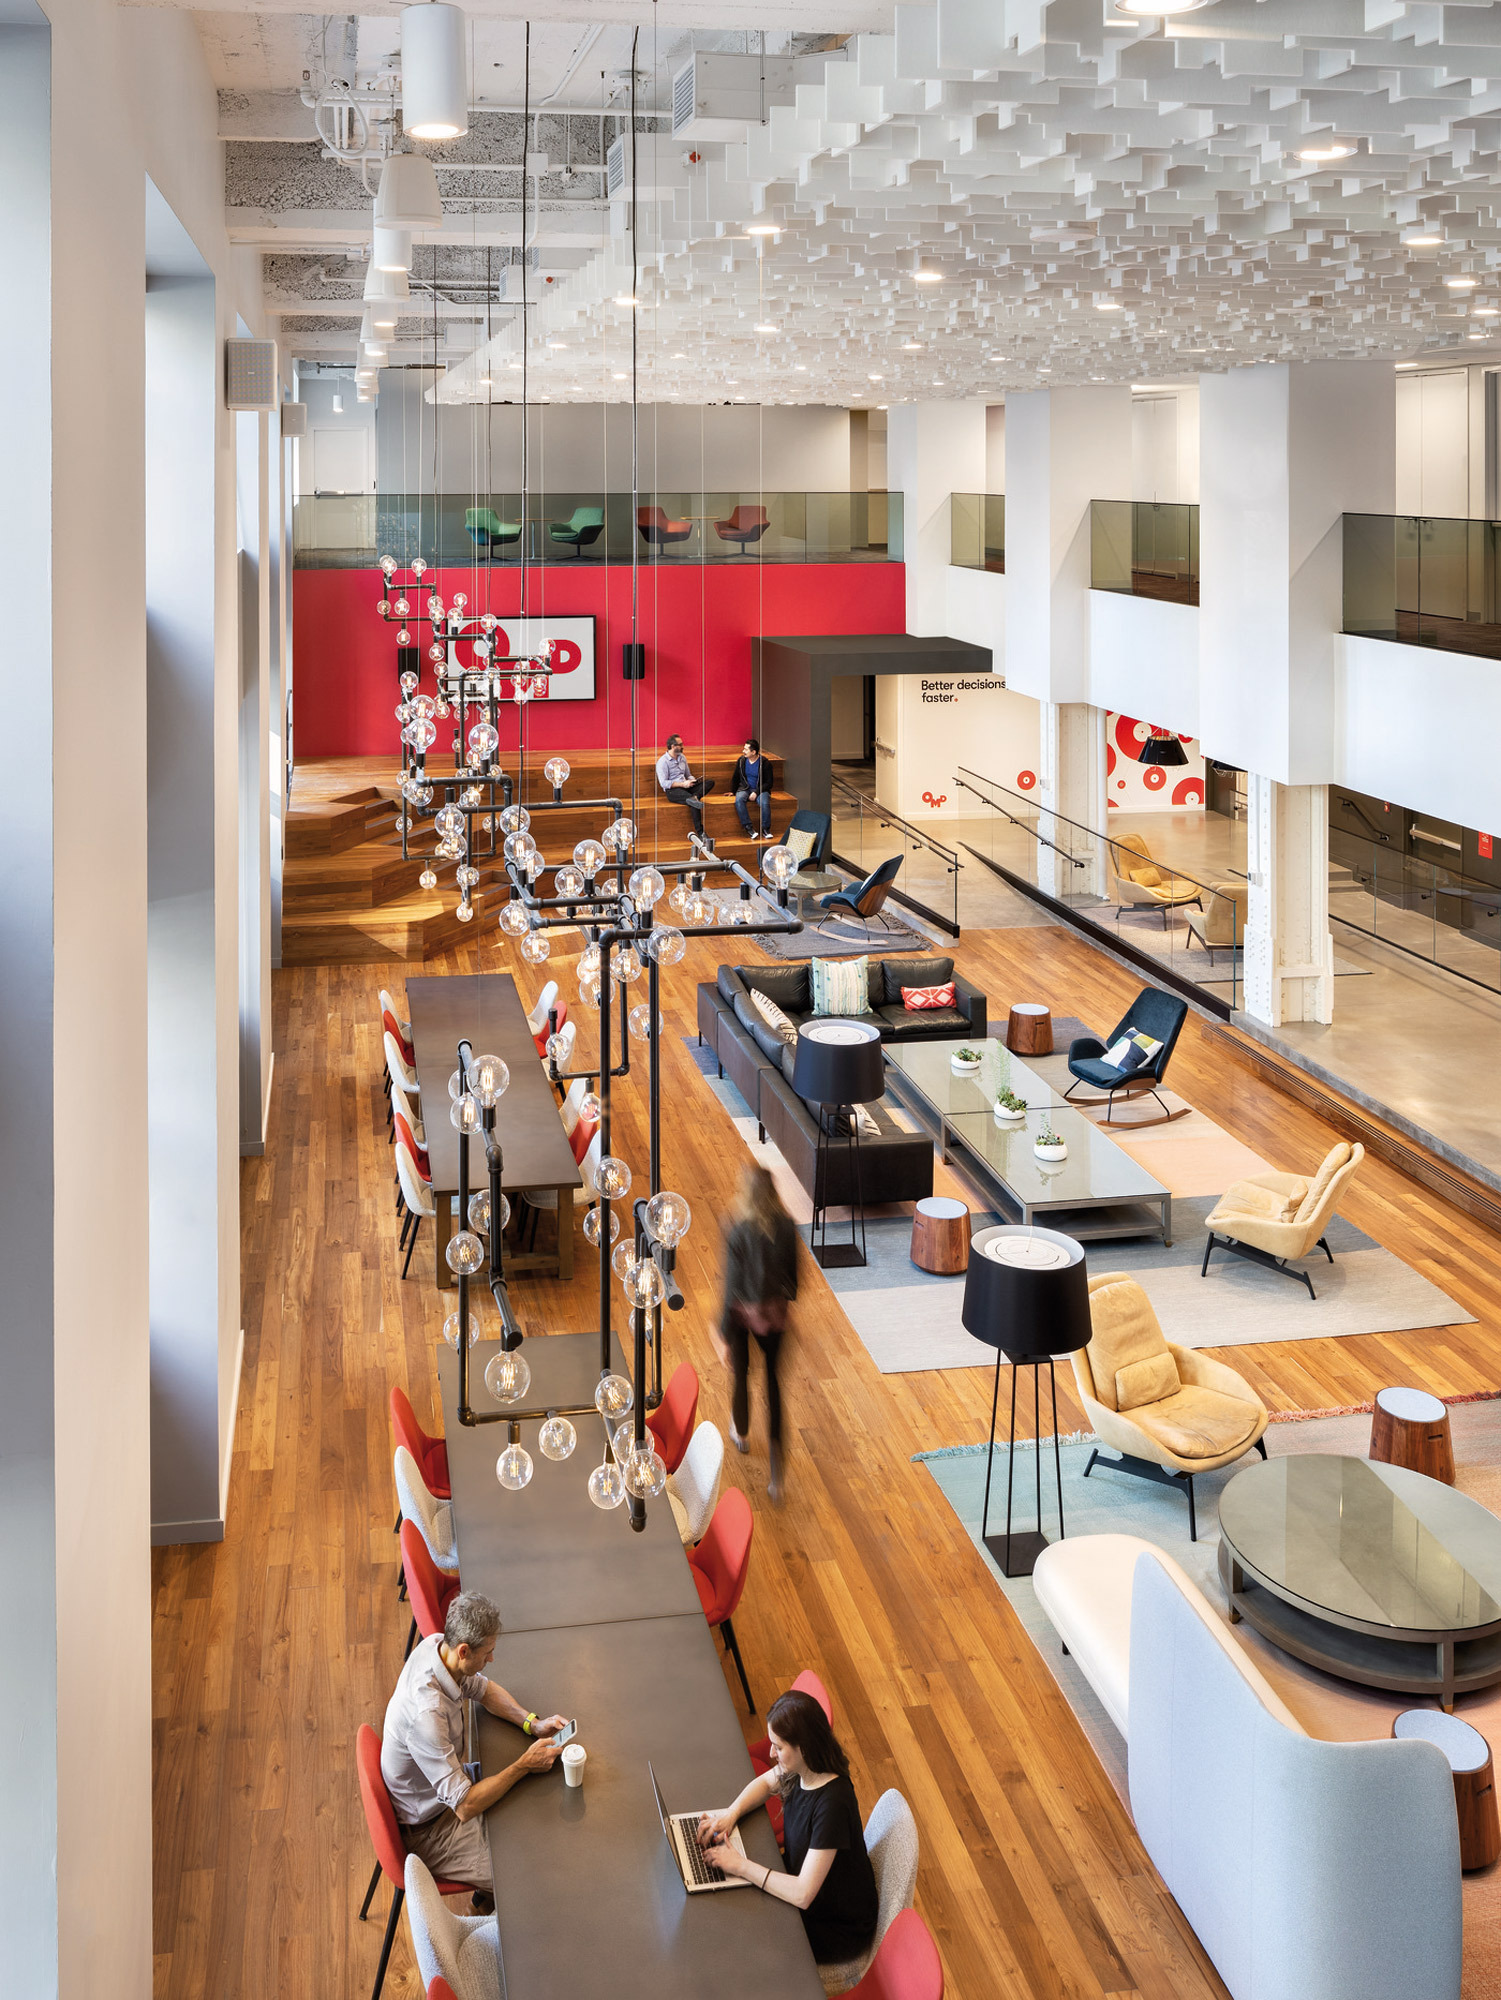 Spacious modern lobby with exposed ceiling, floating white acoustic panels, and pendant lighting. A mix of red accent walls, wooden floors, and contemporary furniture create a dynamic communal space.